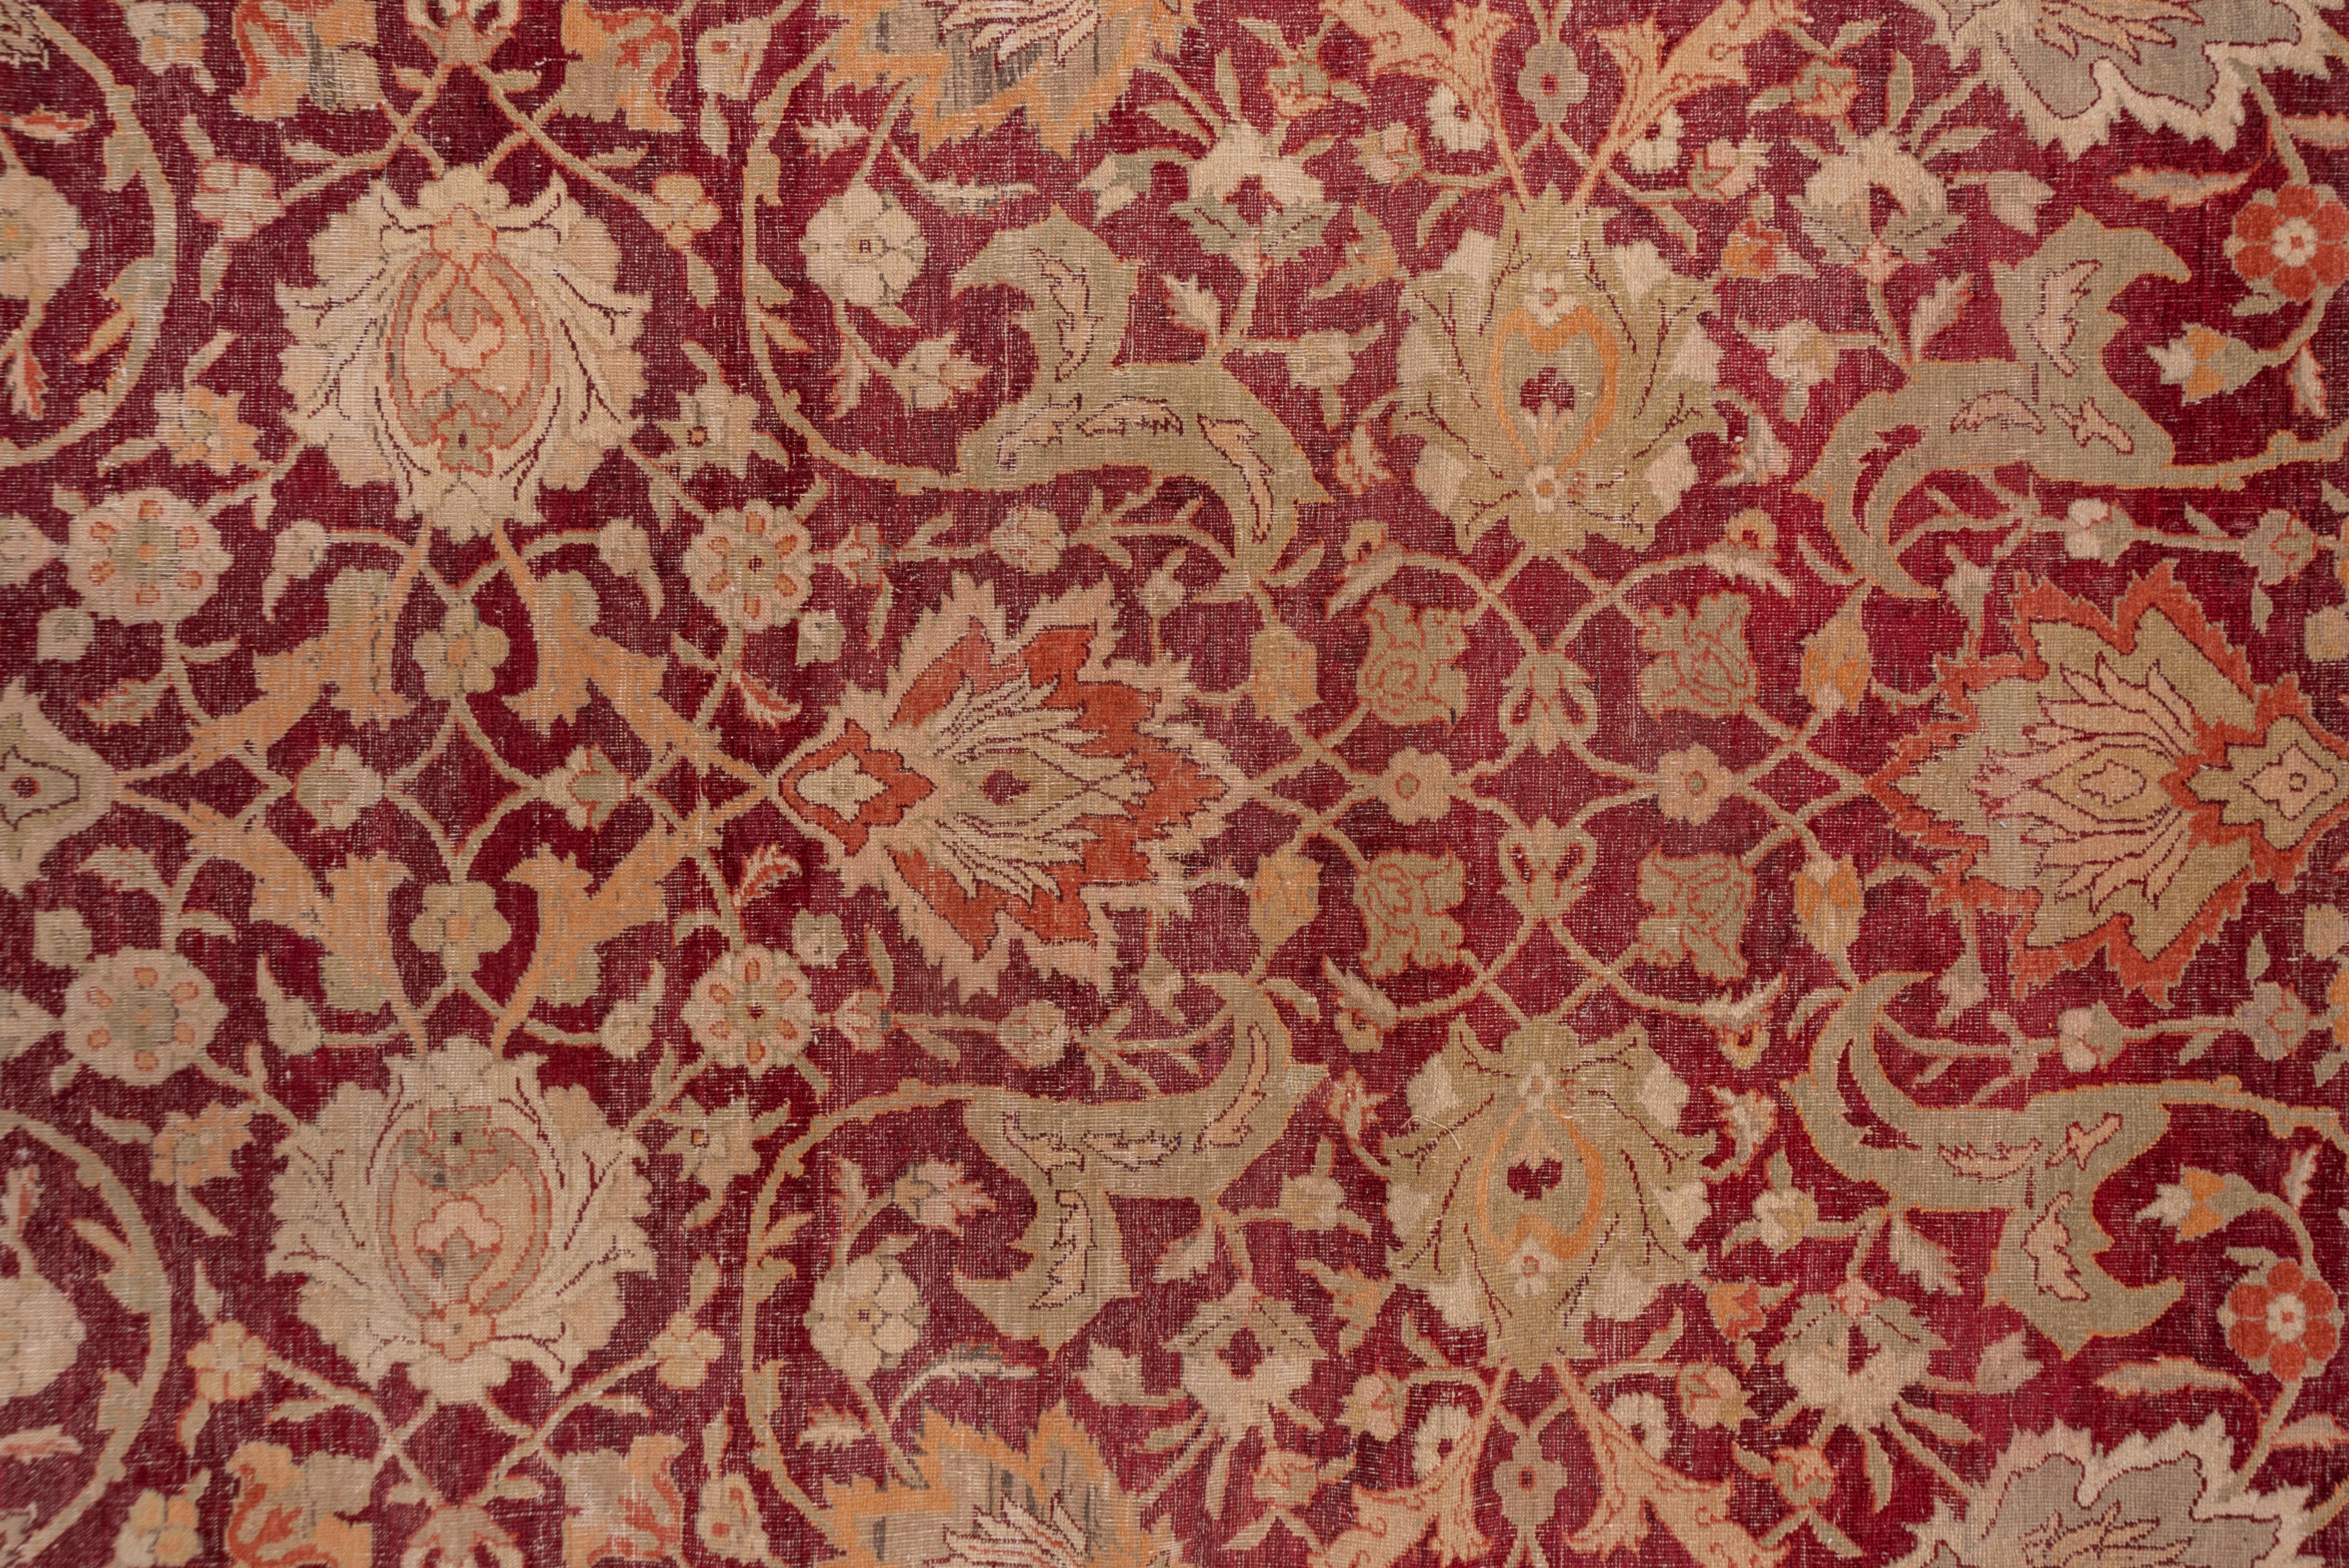 Antique Indian Amritzar Carpet, Burgundy Allover Field, Gray Borders In Good Condition For Sale In New York, NY